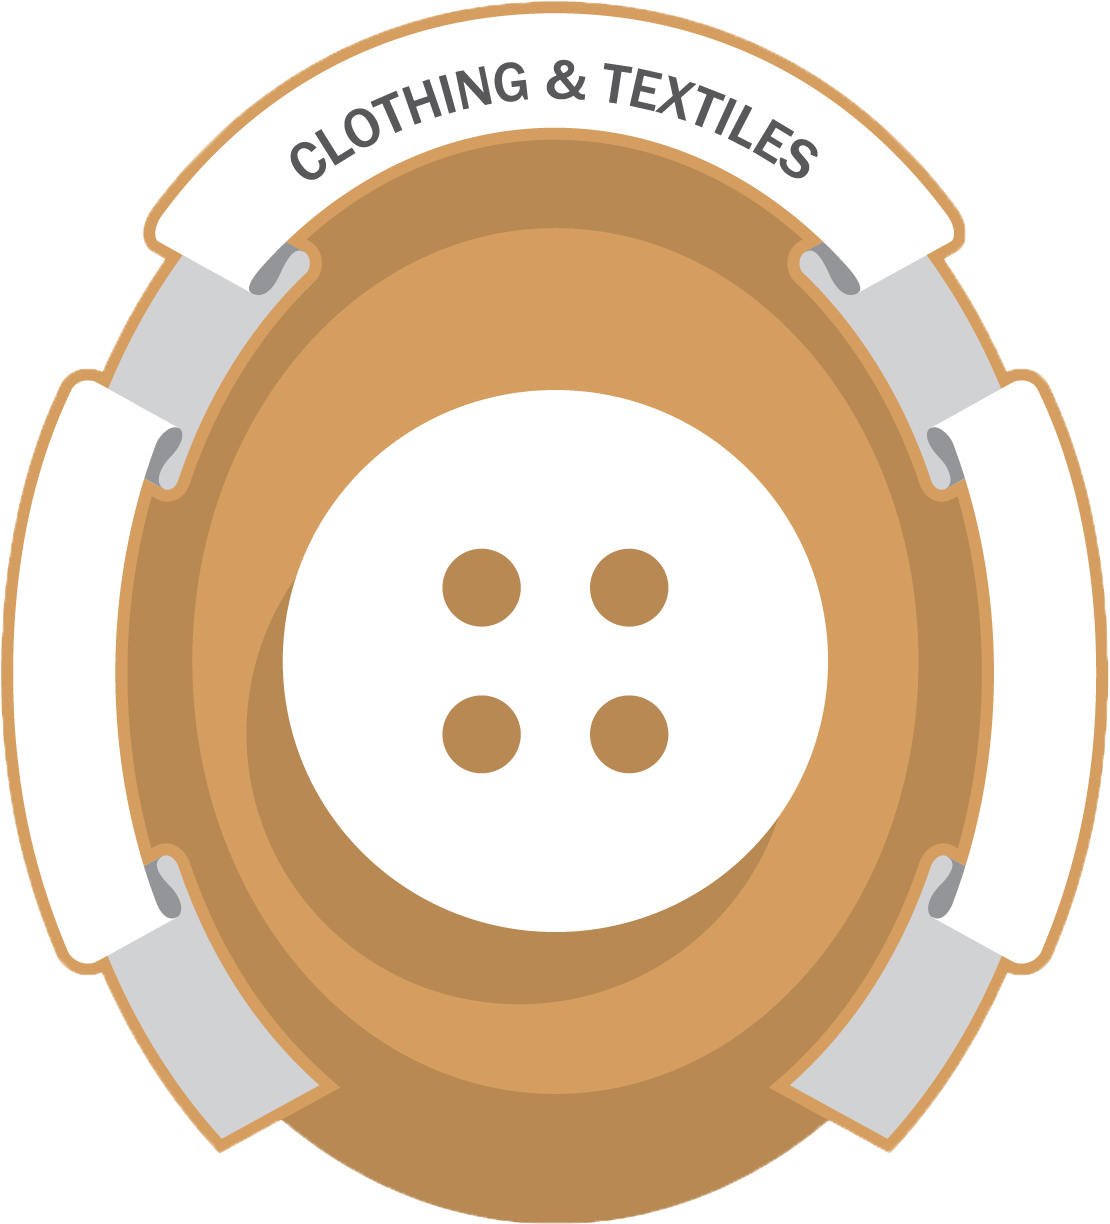 Clothing and Textiles logo